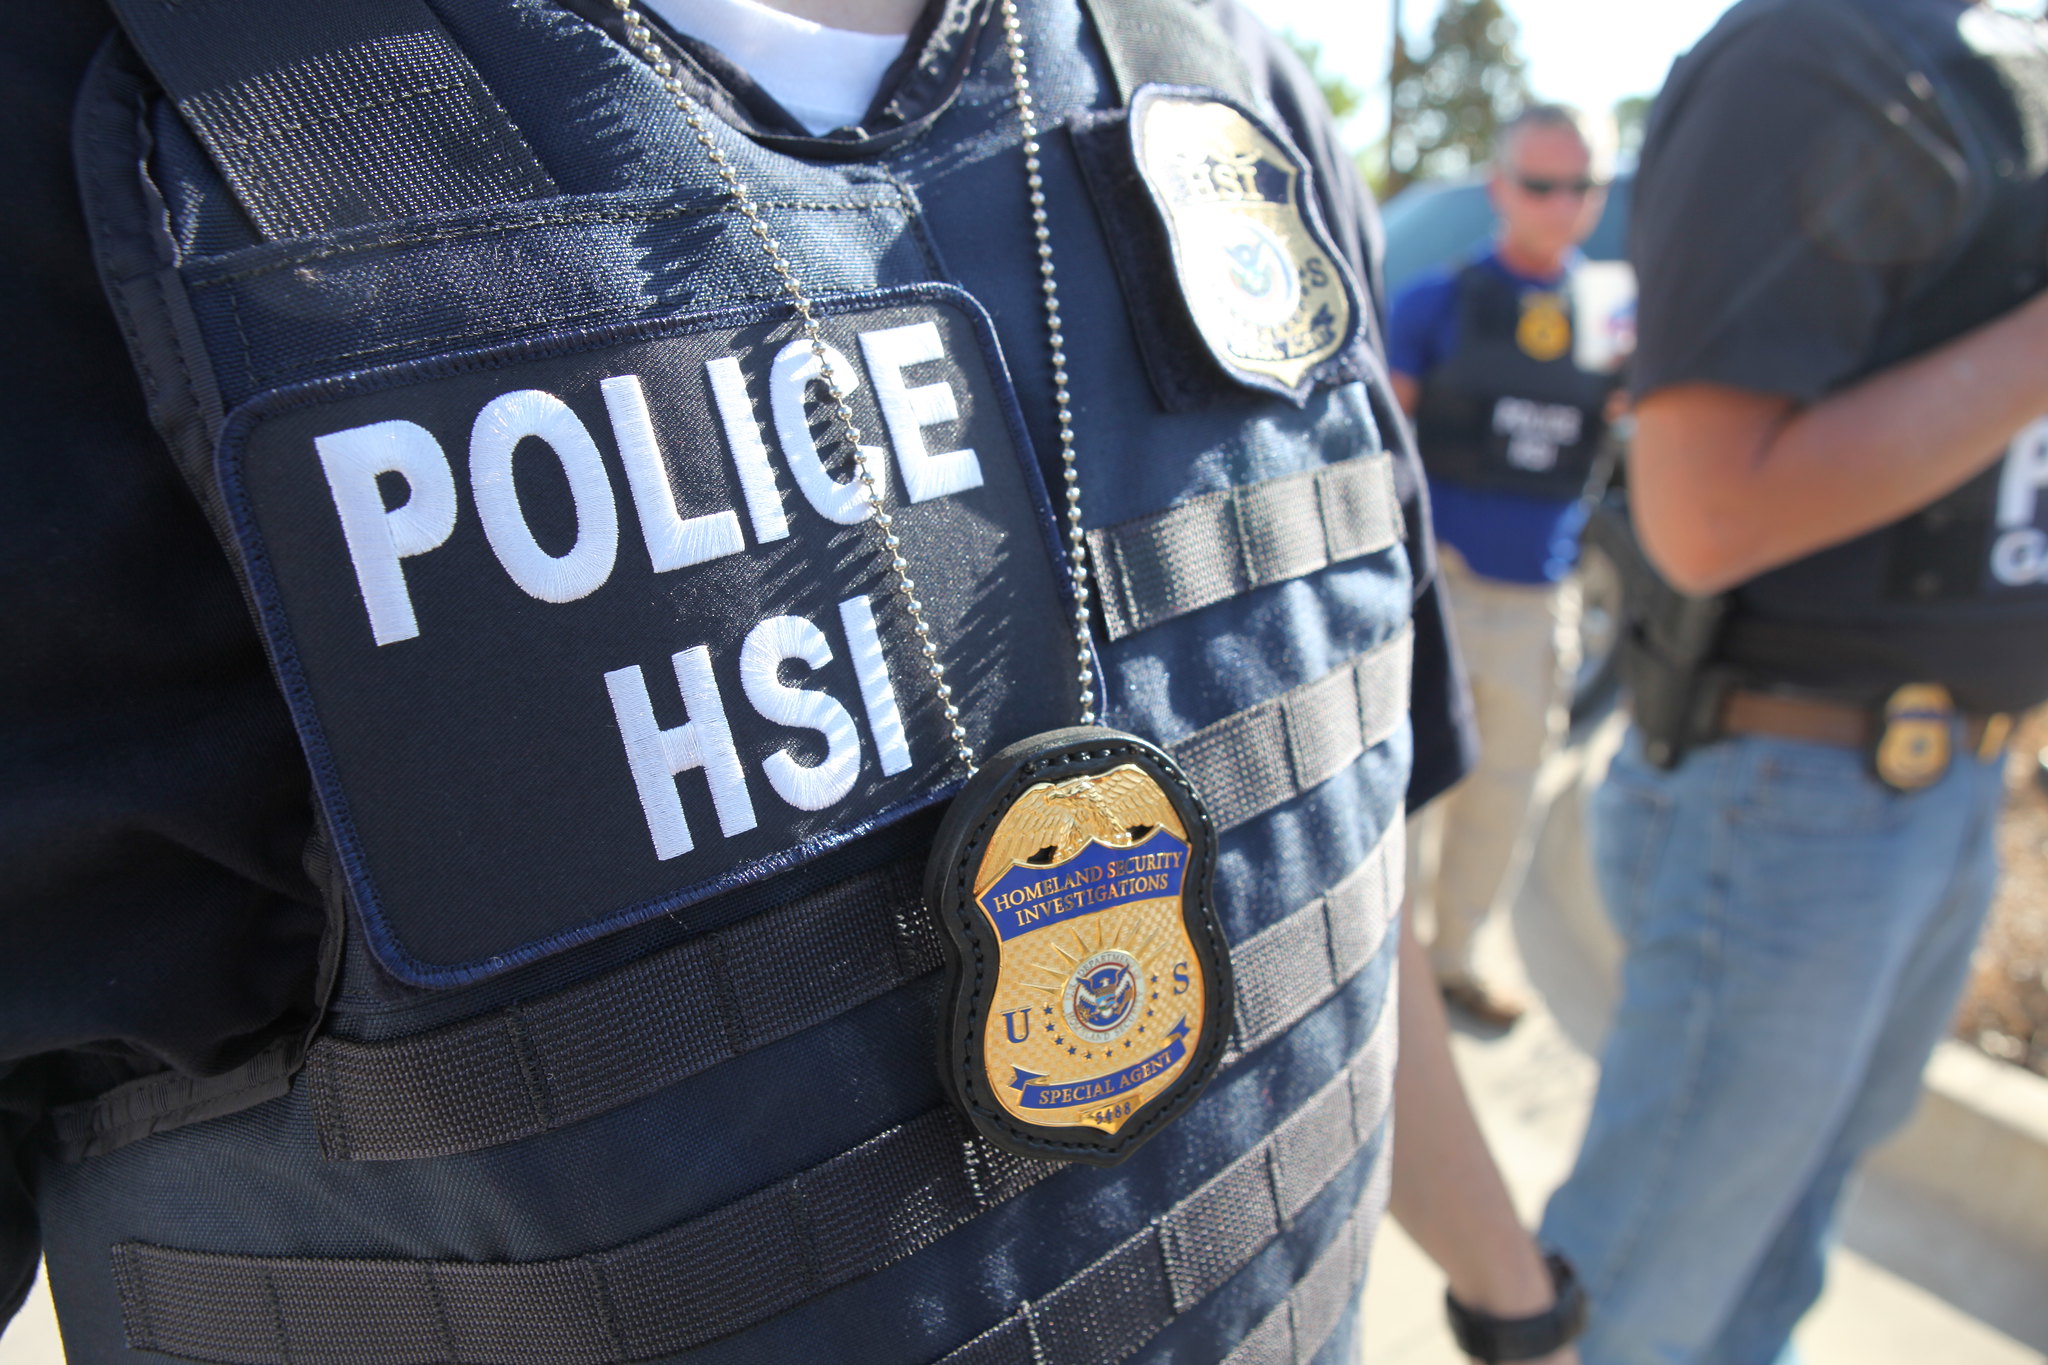 Homeland Security Investigations (HSI)